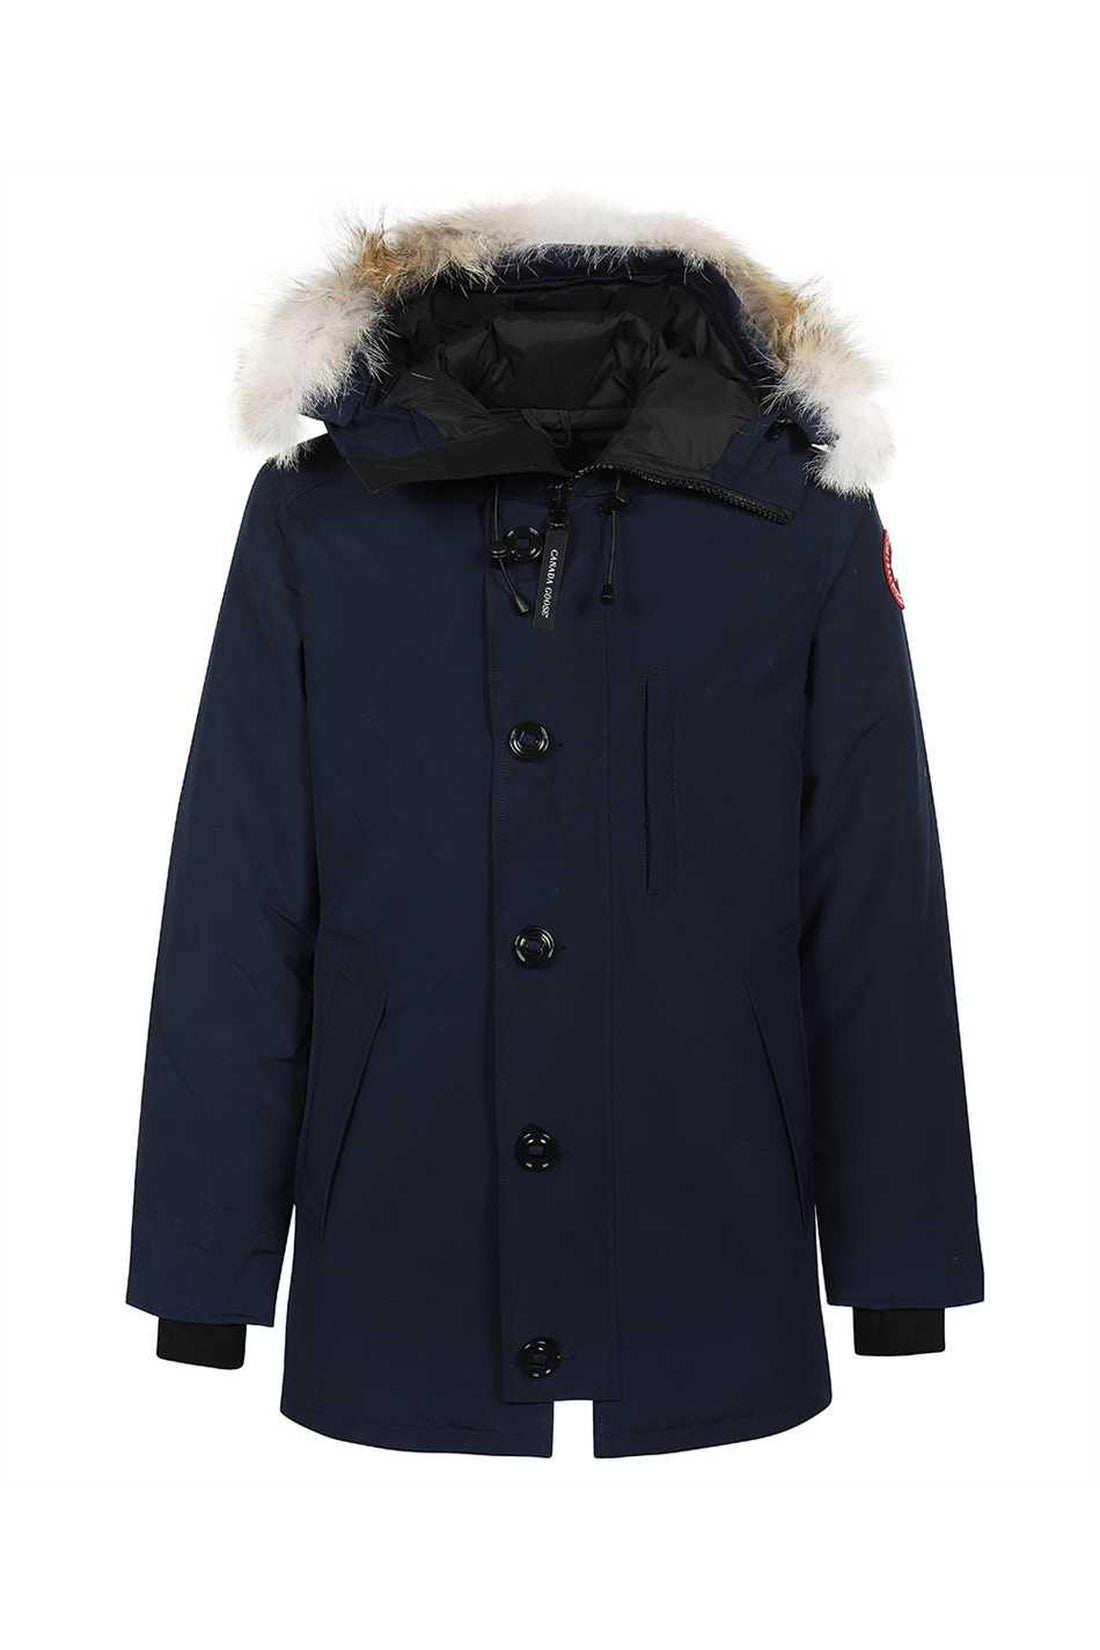 Canada Goose-OUTLET-SALE-Chateau hooded parka-ARCHIVIST